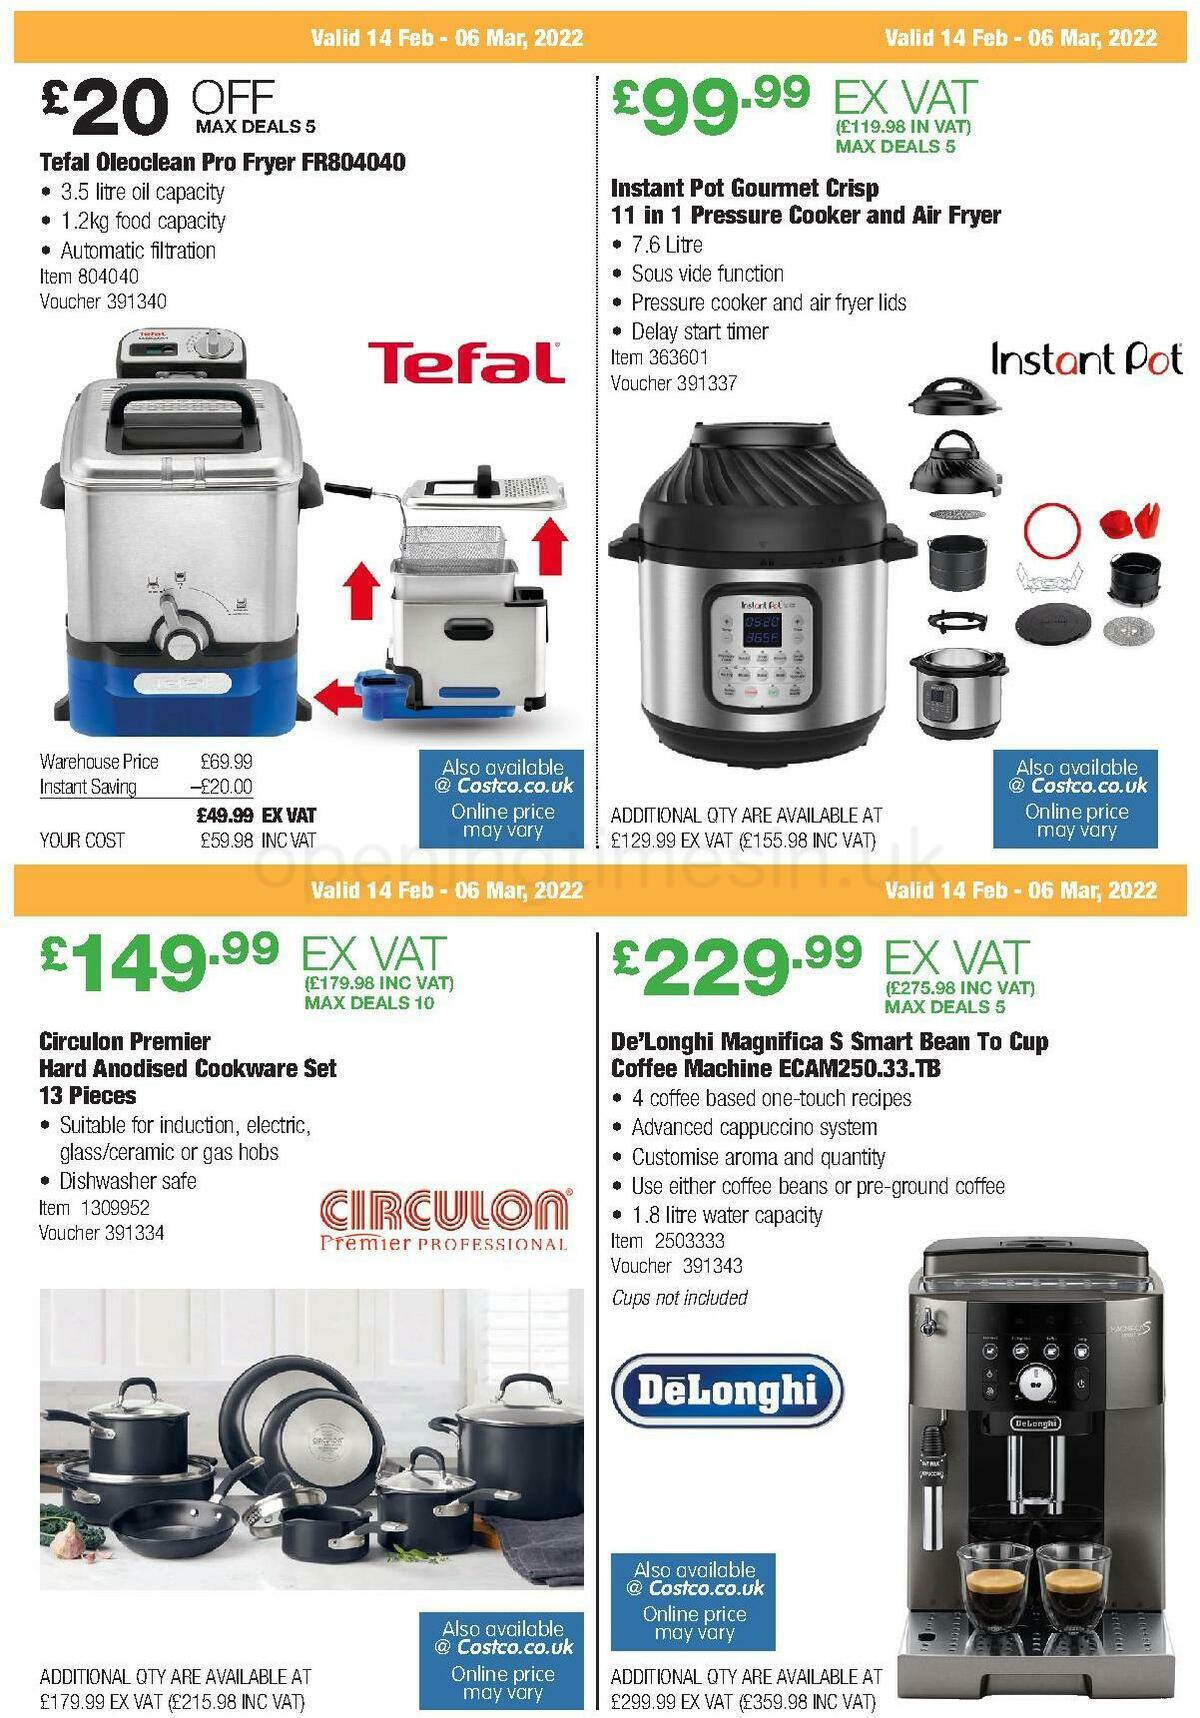 Costco Scotland & Wales Offers from 14 February